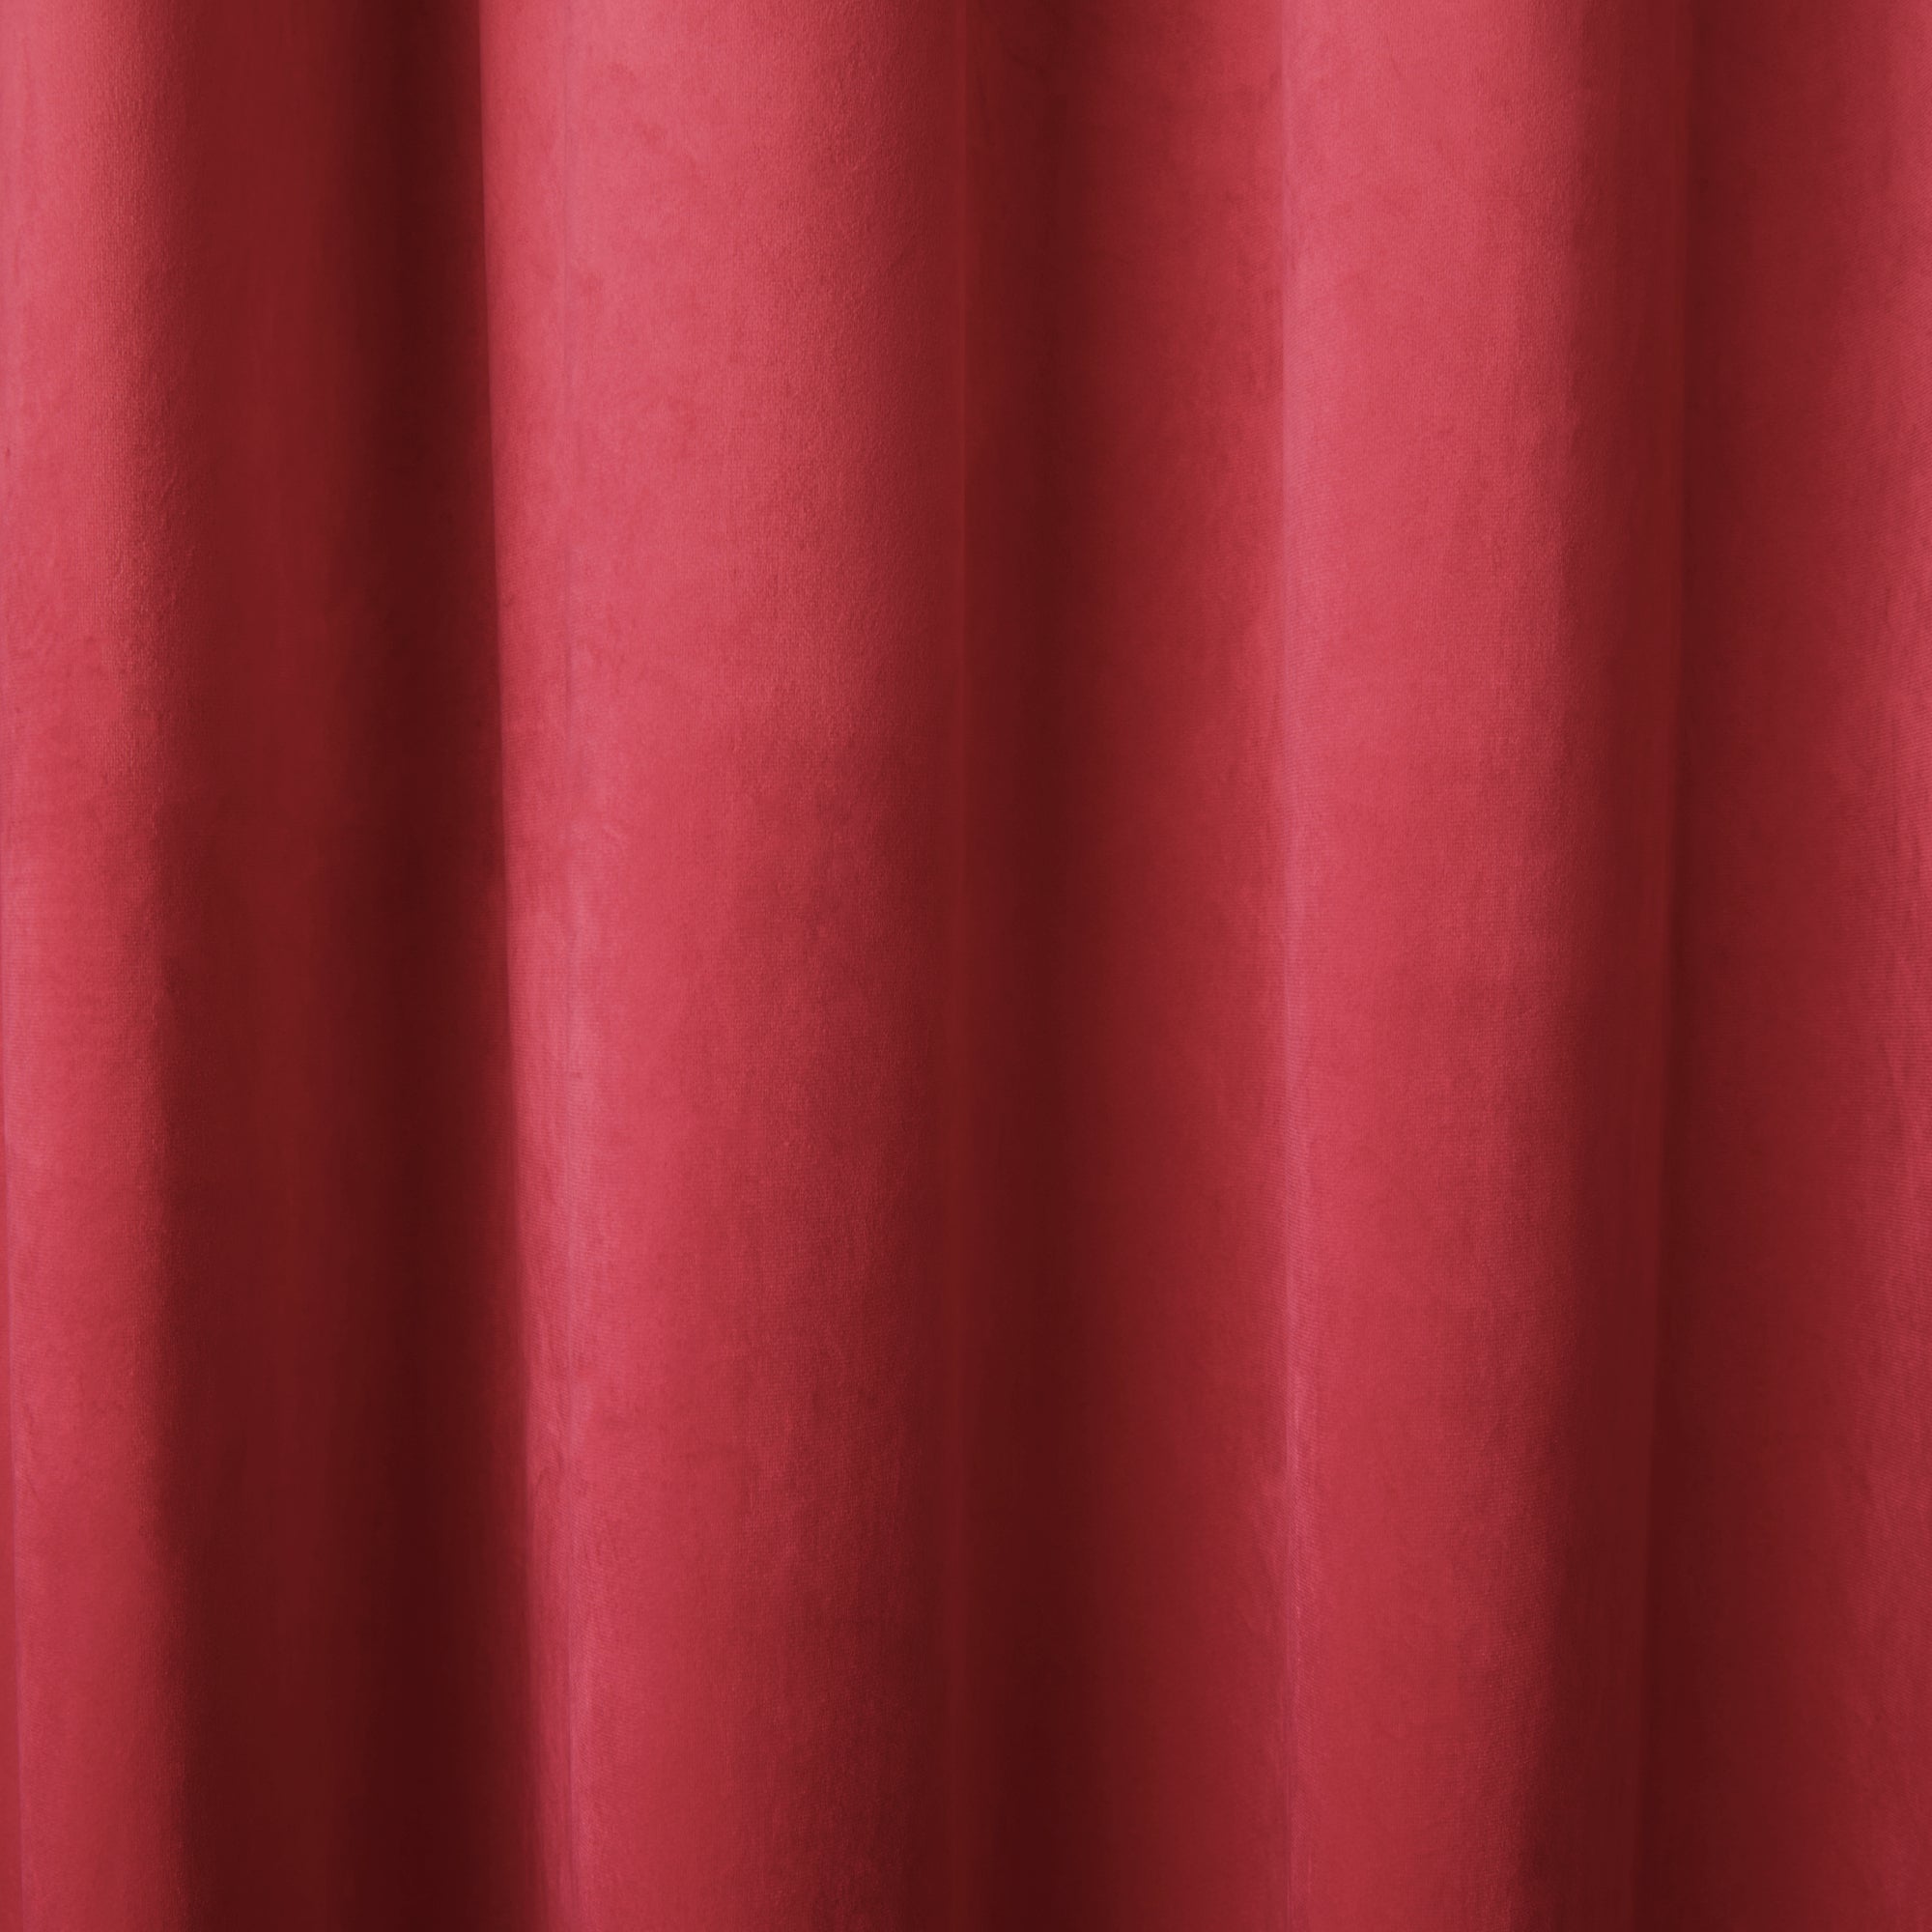 Pair of Eyelet Curtains Montrose by Laurence Llewelyn-Bowen in Claret